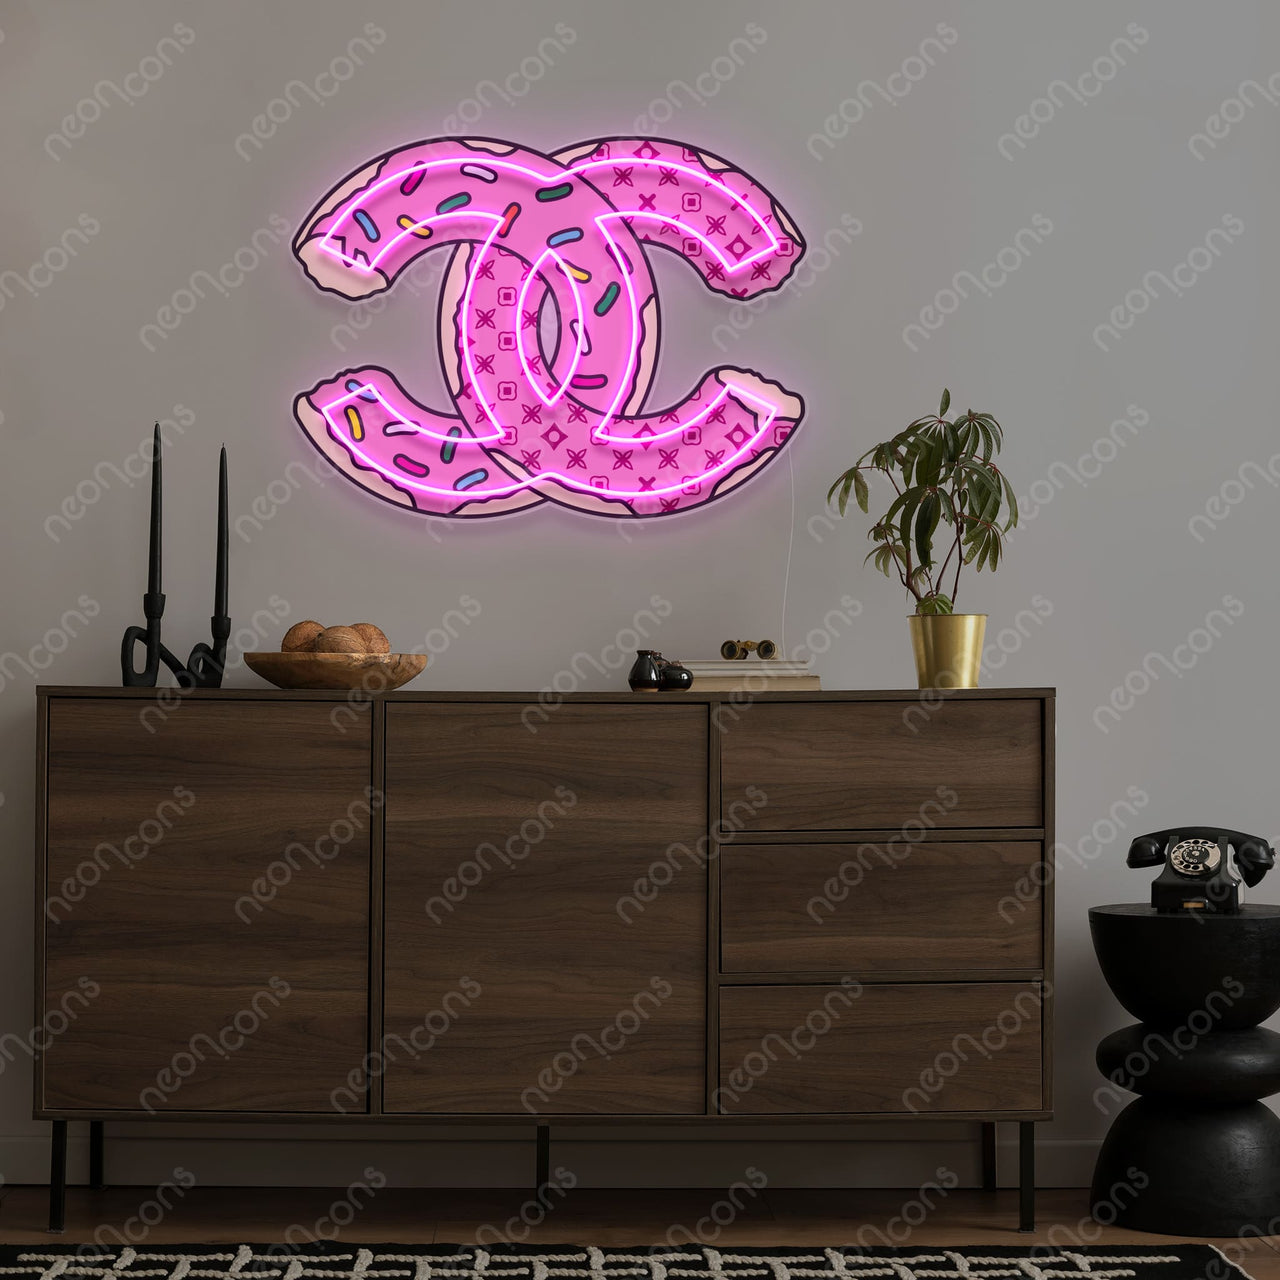 "Coco-Nut" LED Neon x Acrylic Artwork by Neon Icons